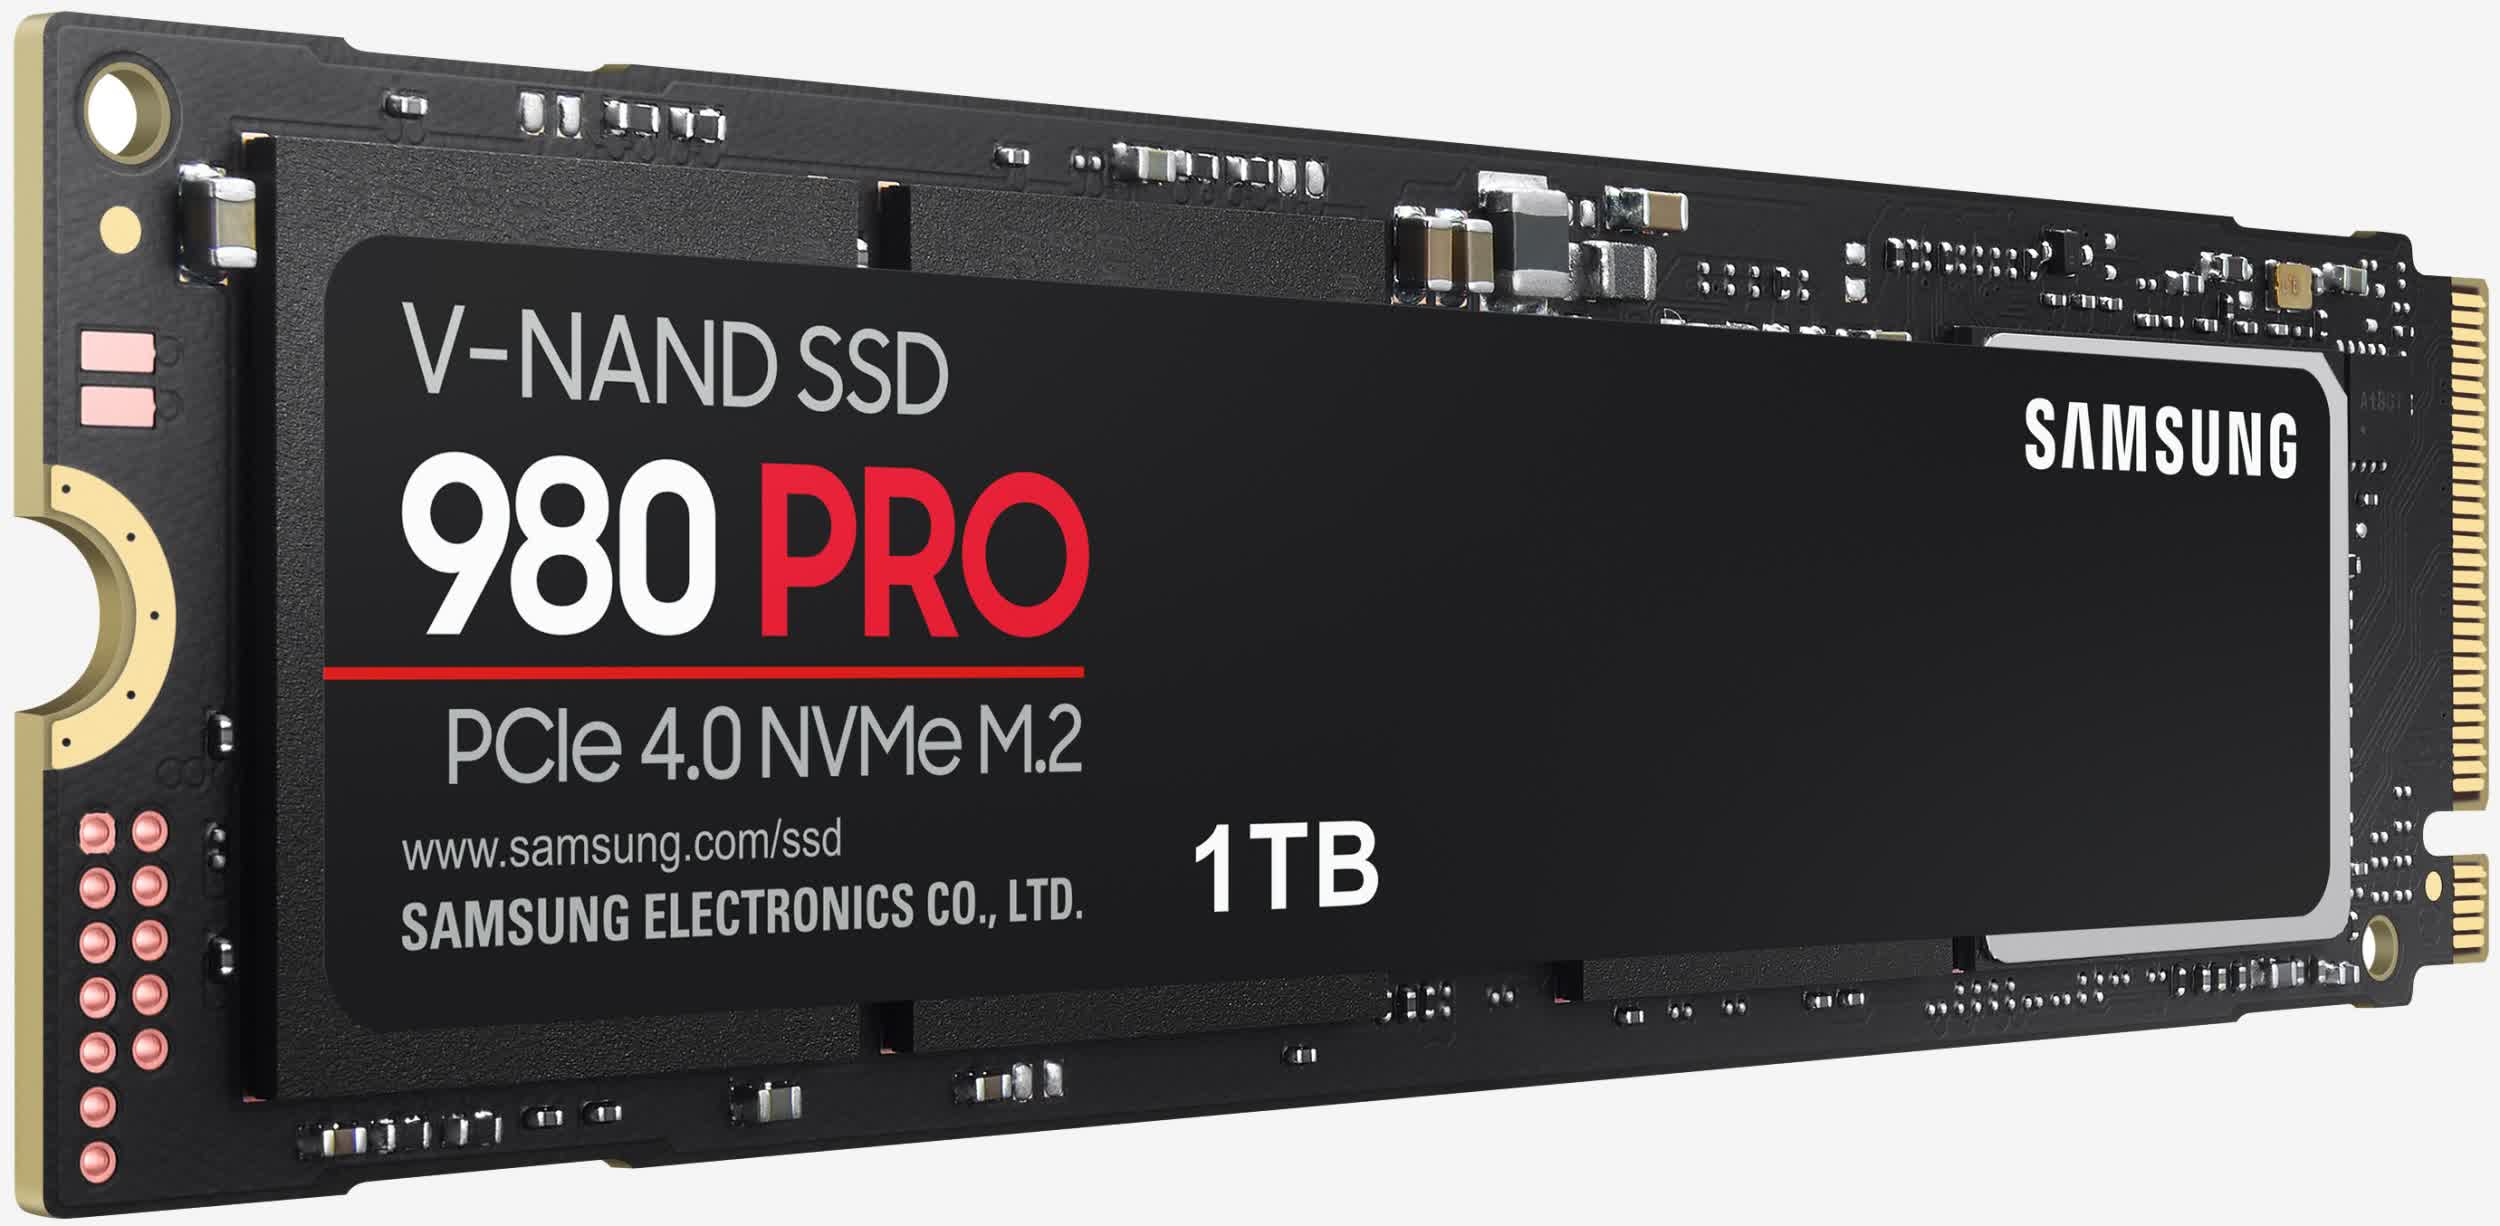 Samsung's 980 Pro PCIe 4.0 SSD is surprisingly affordable on the low end